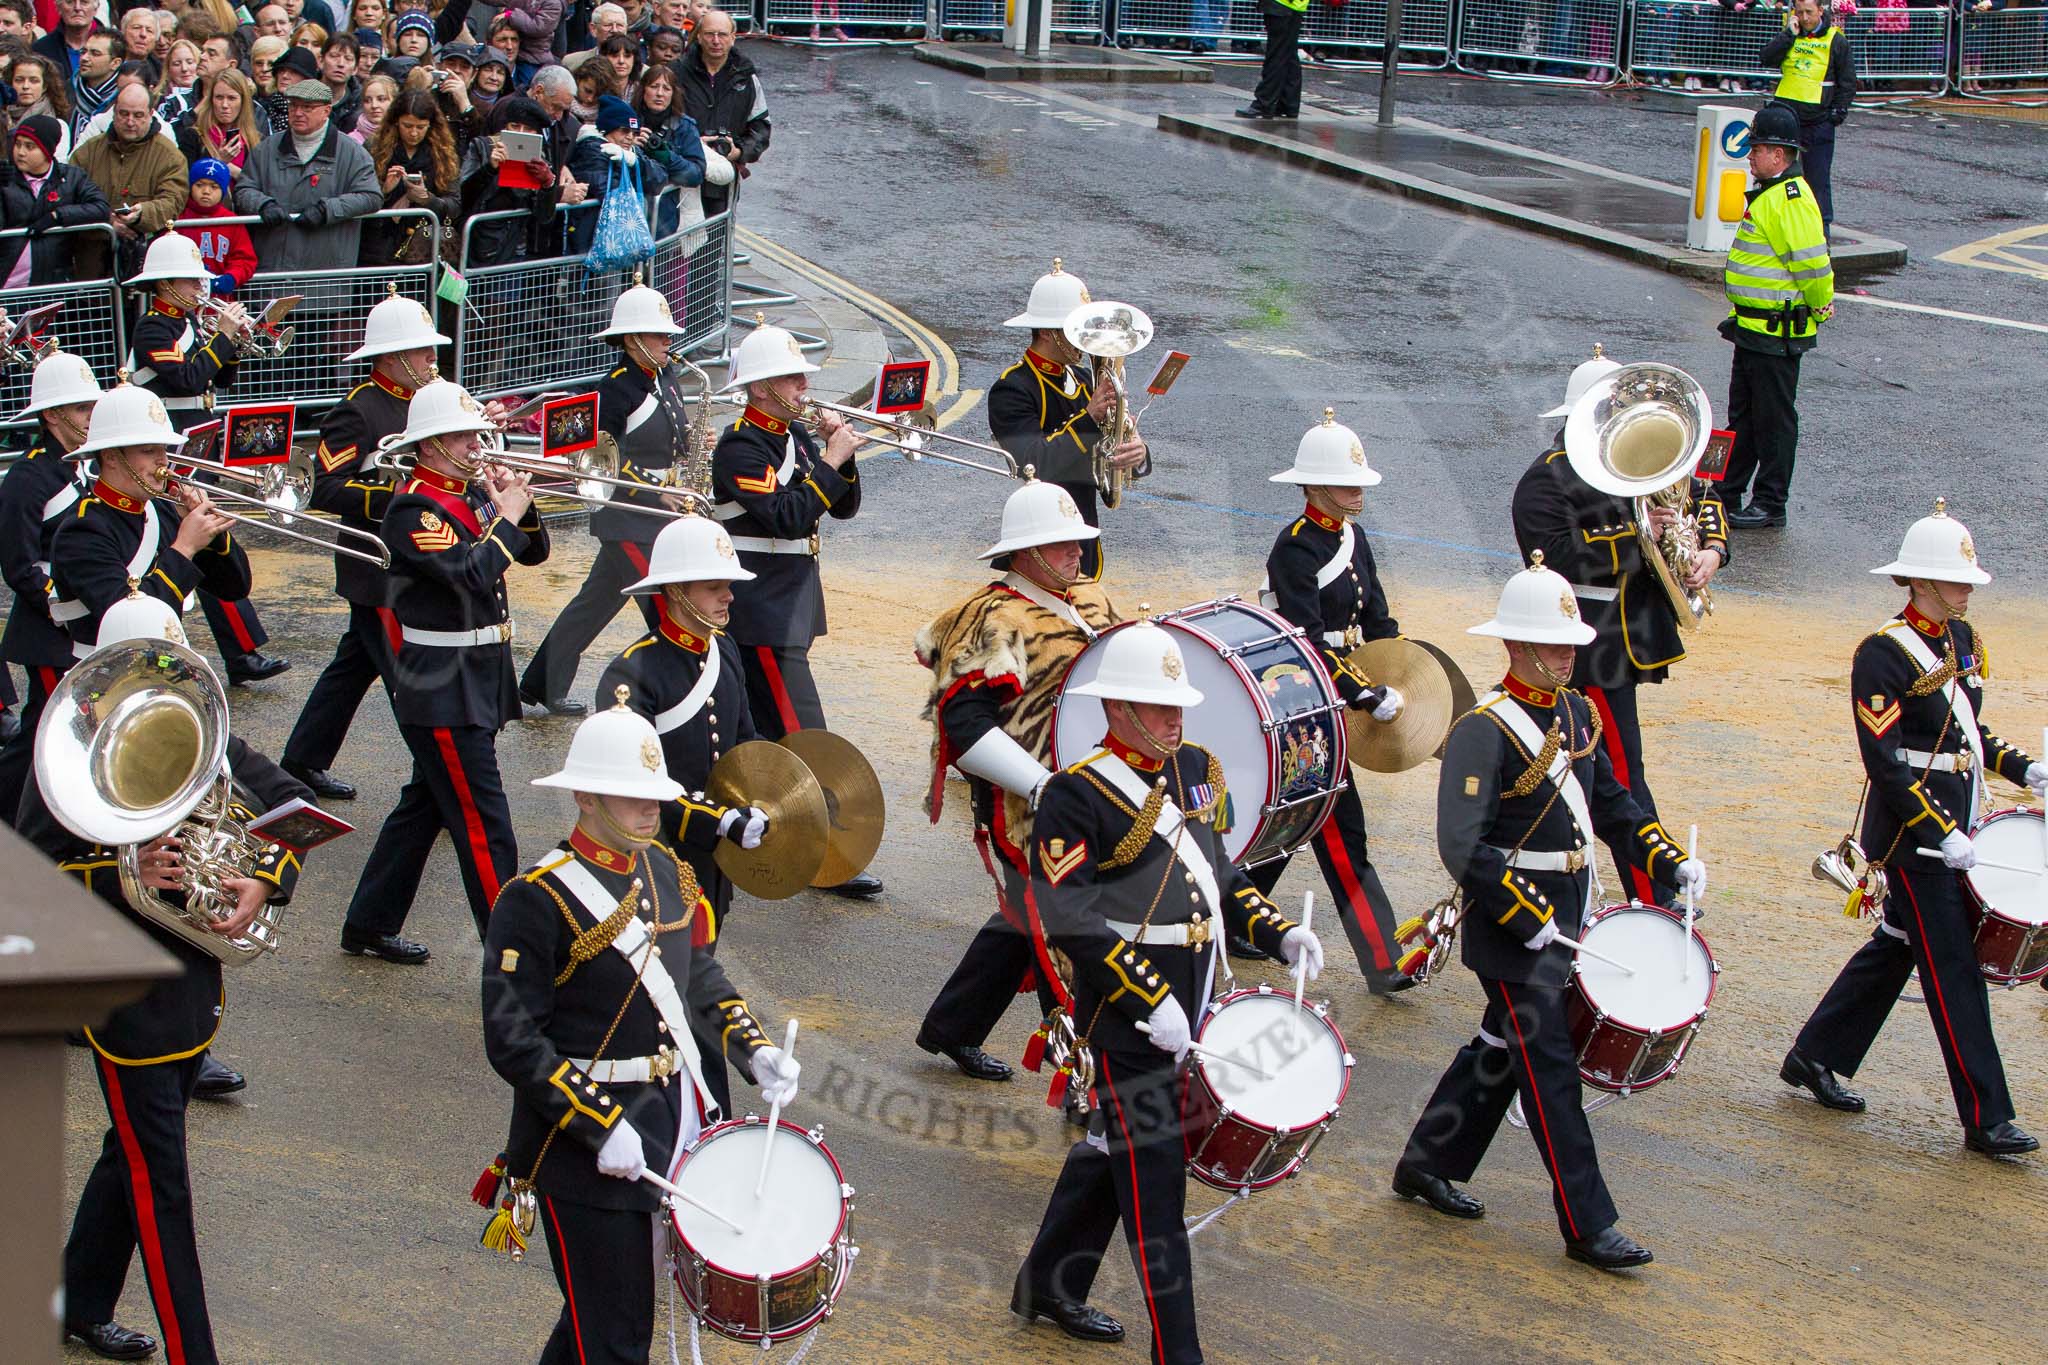 Lord Mayor's Show 2012: Entry 86 - Royal Marines Band (HMS Collingwood)..
Press stand opposite Mansion House, City of London,
London,
Greater London,
United Kingdom,
on 10 November 2012 at 11:38, image #1132